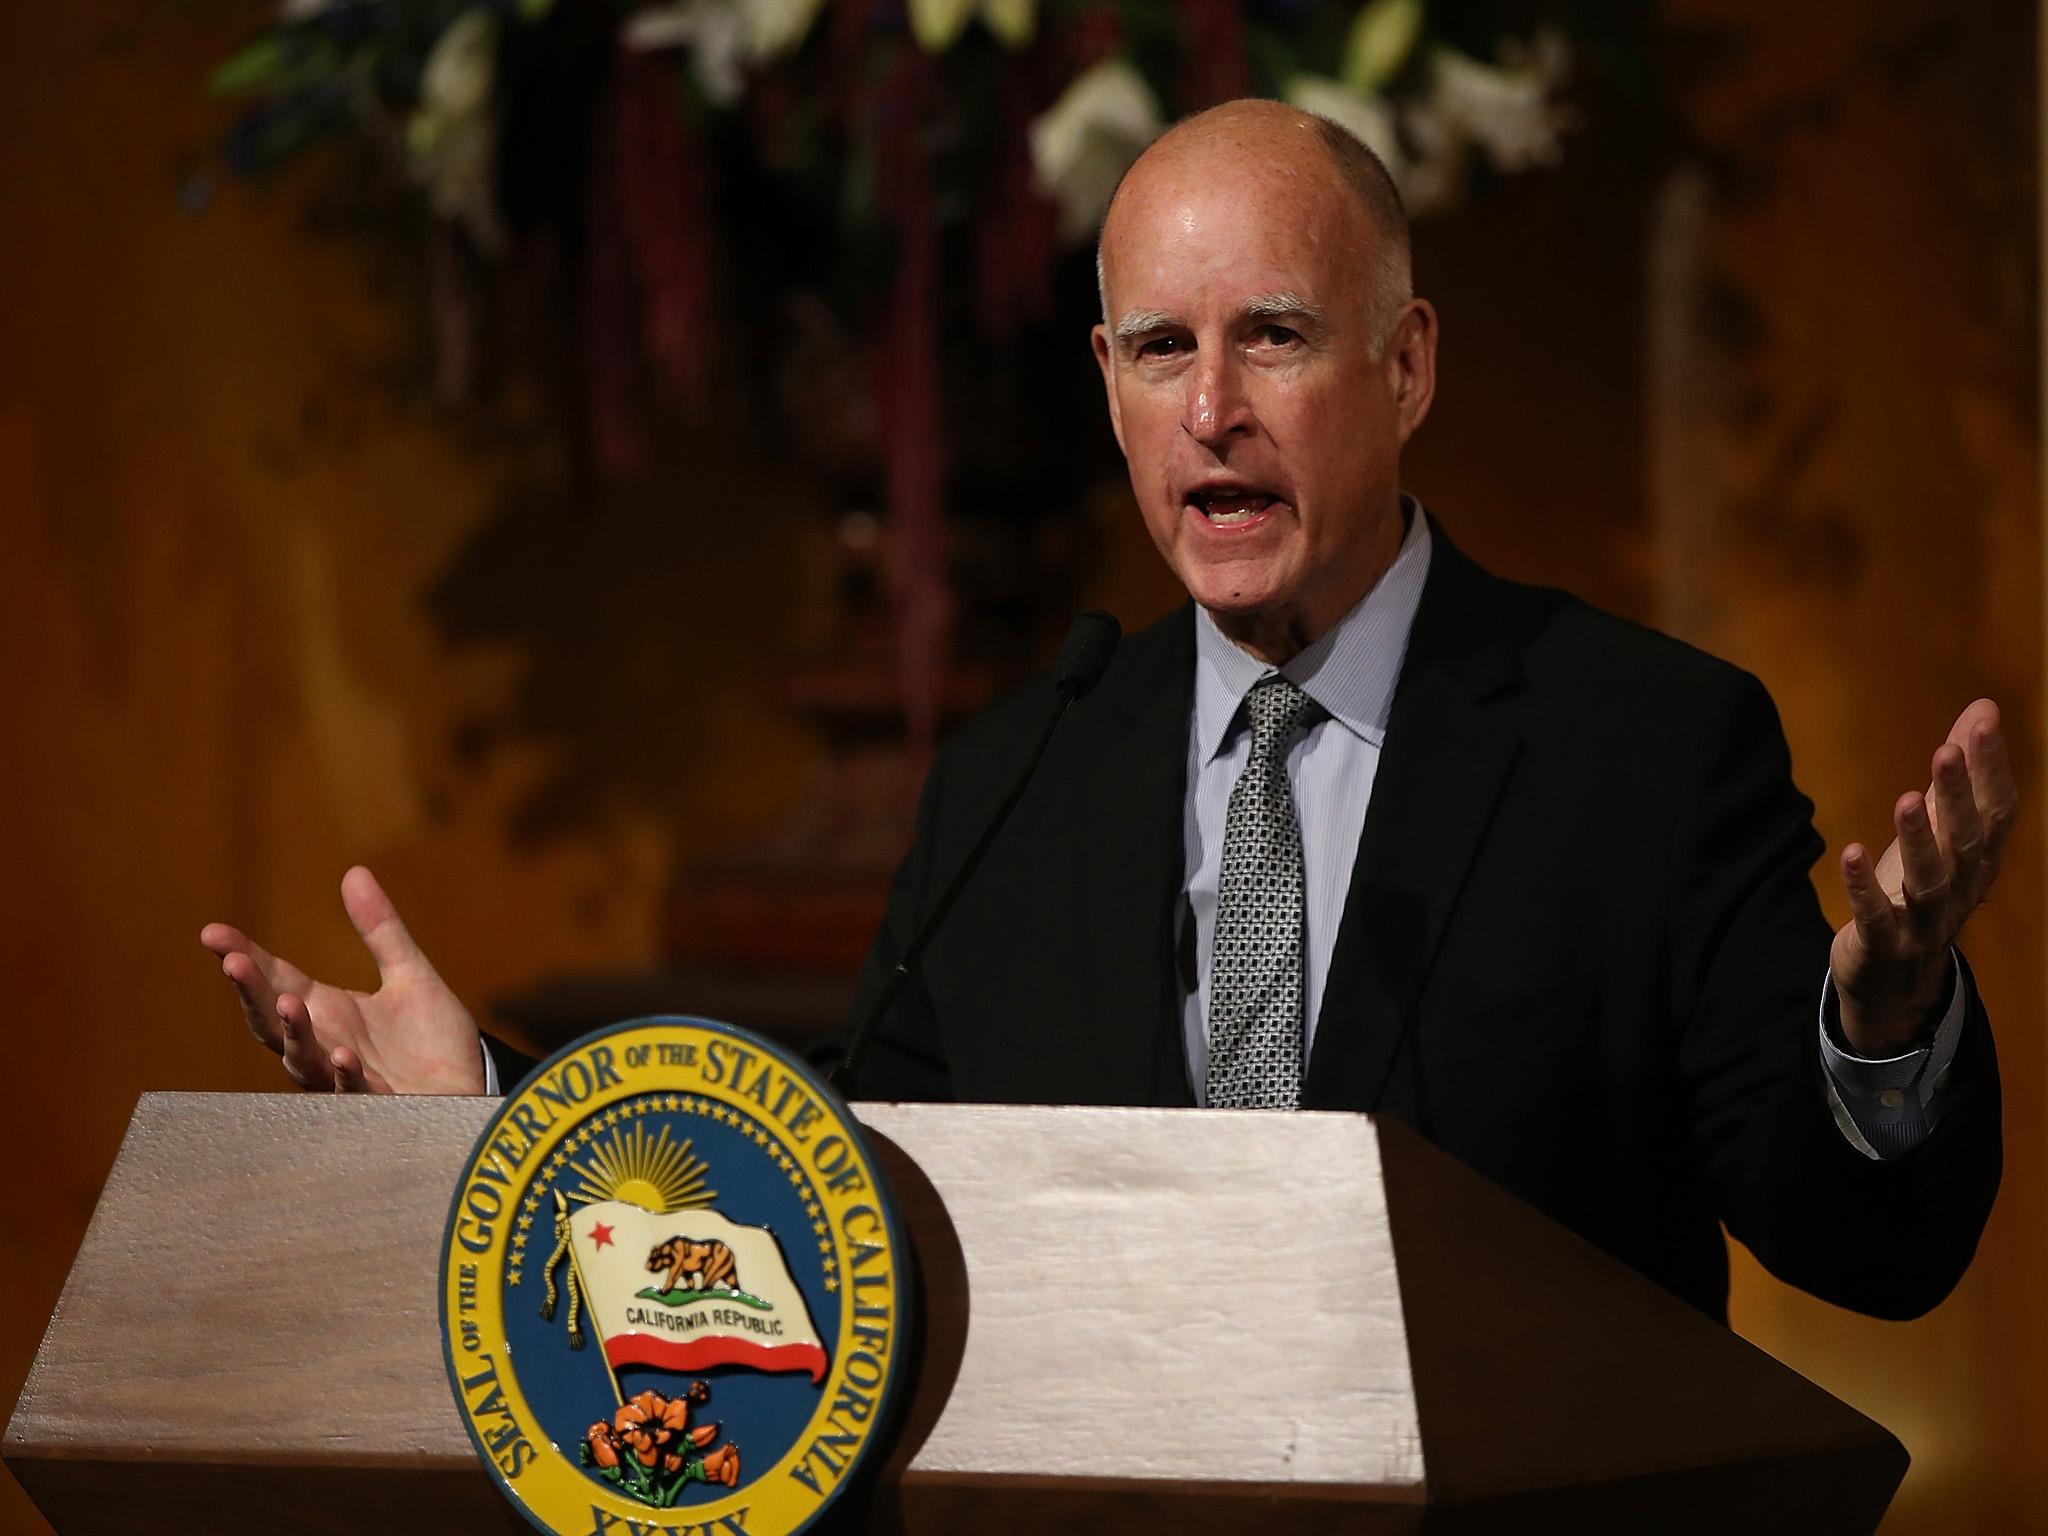 'Big Tobacco was pretty powerful, but they lied and they came a cropper, not just with scientists but with lawyers. And, in California, we got plenty of lawyers,' Jerry Brown told scientists